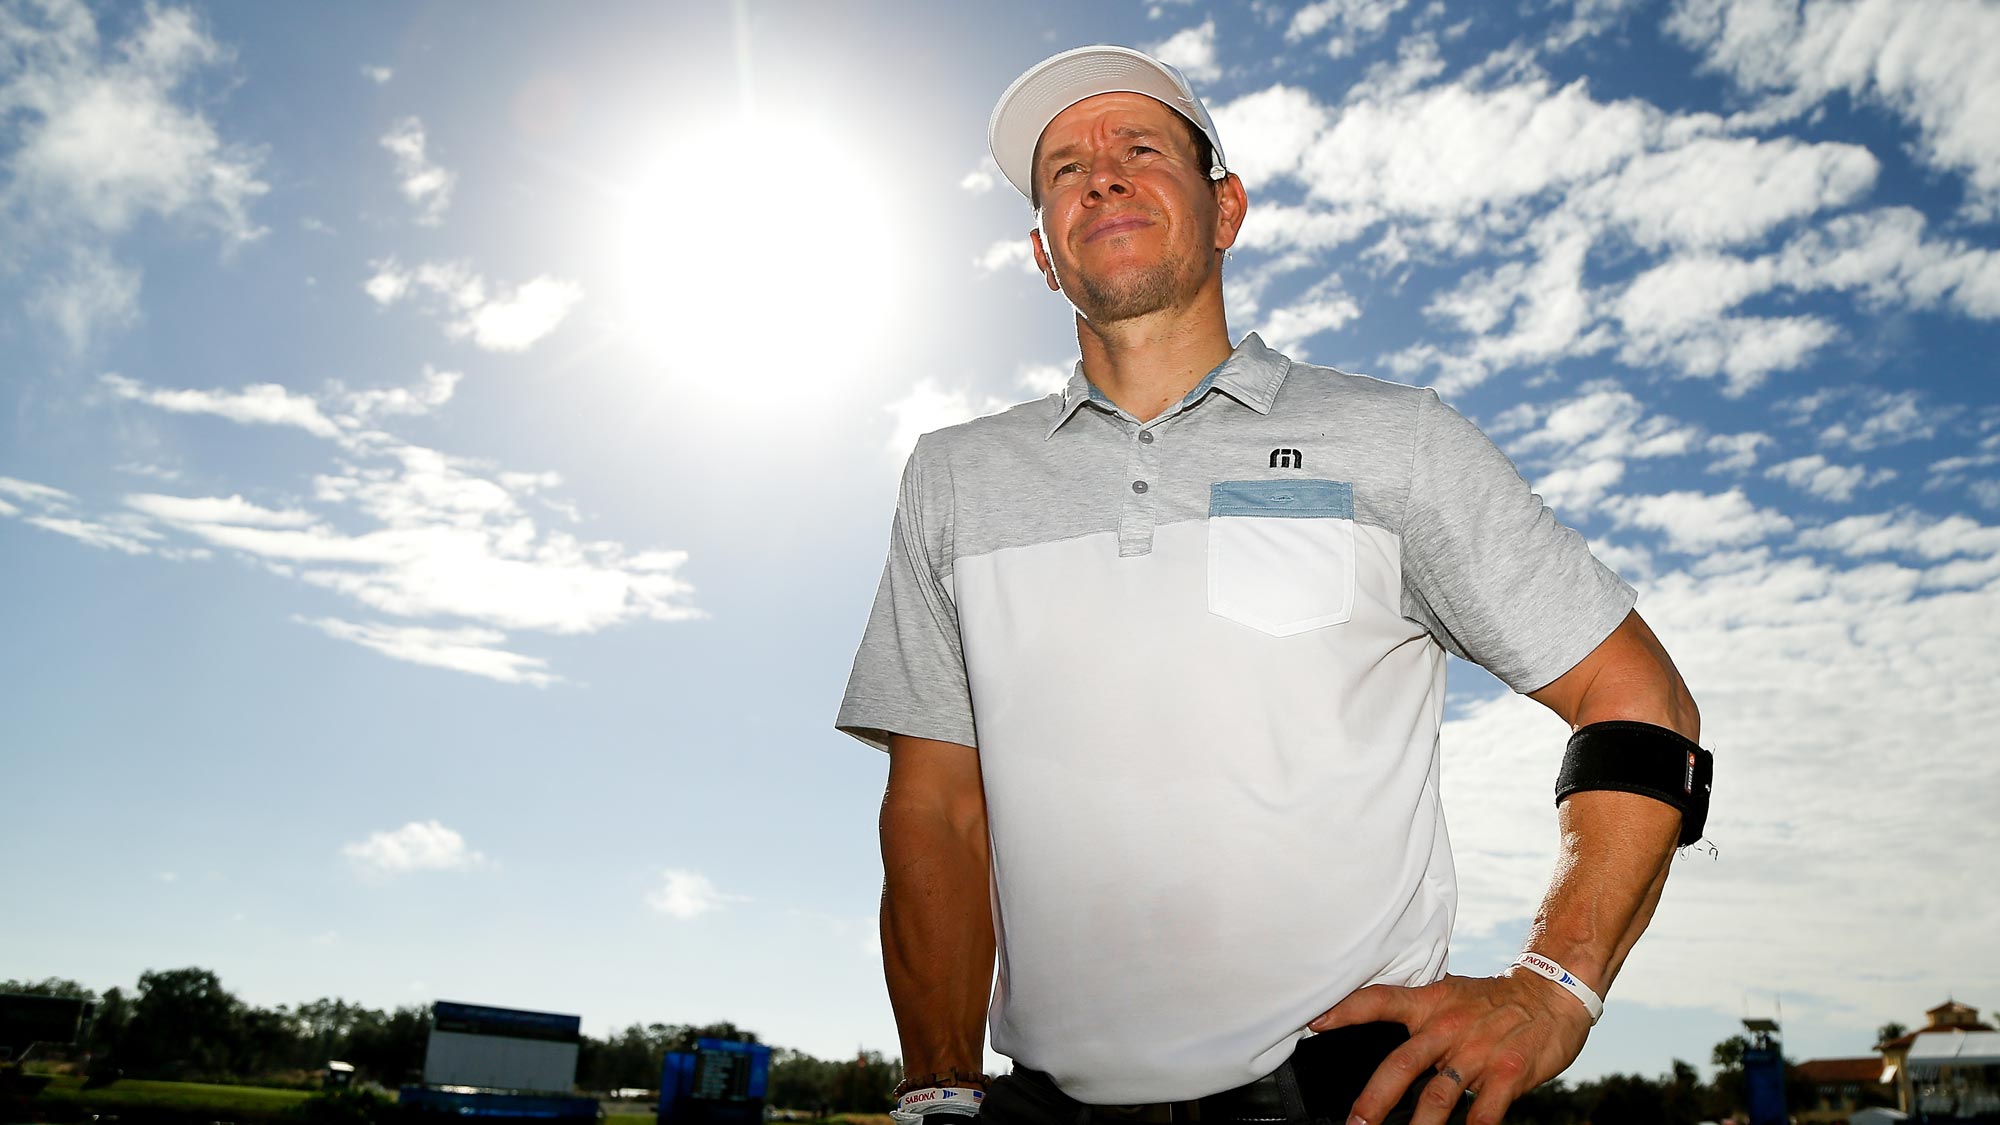 Actor Mark Wahlberg looks on during the CME Group charity event to benefit St. Jude Children's Research Hospital prior to the LPGA CME Group Tour Championship